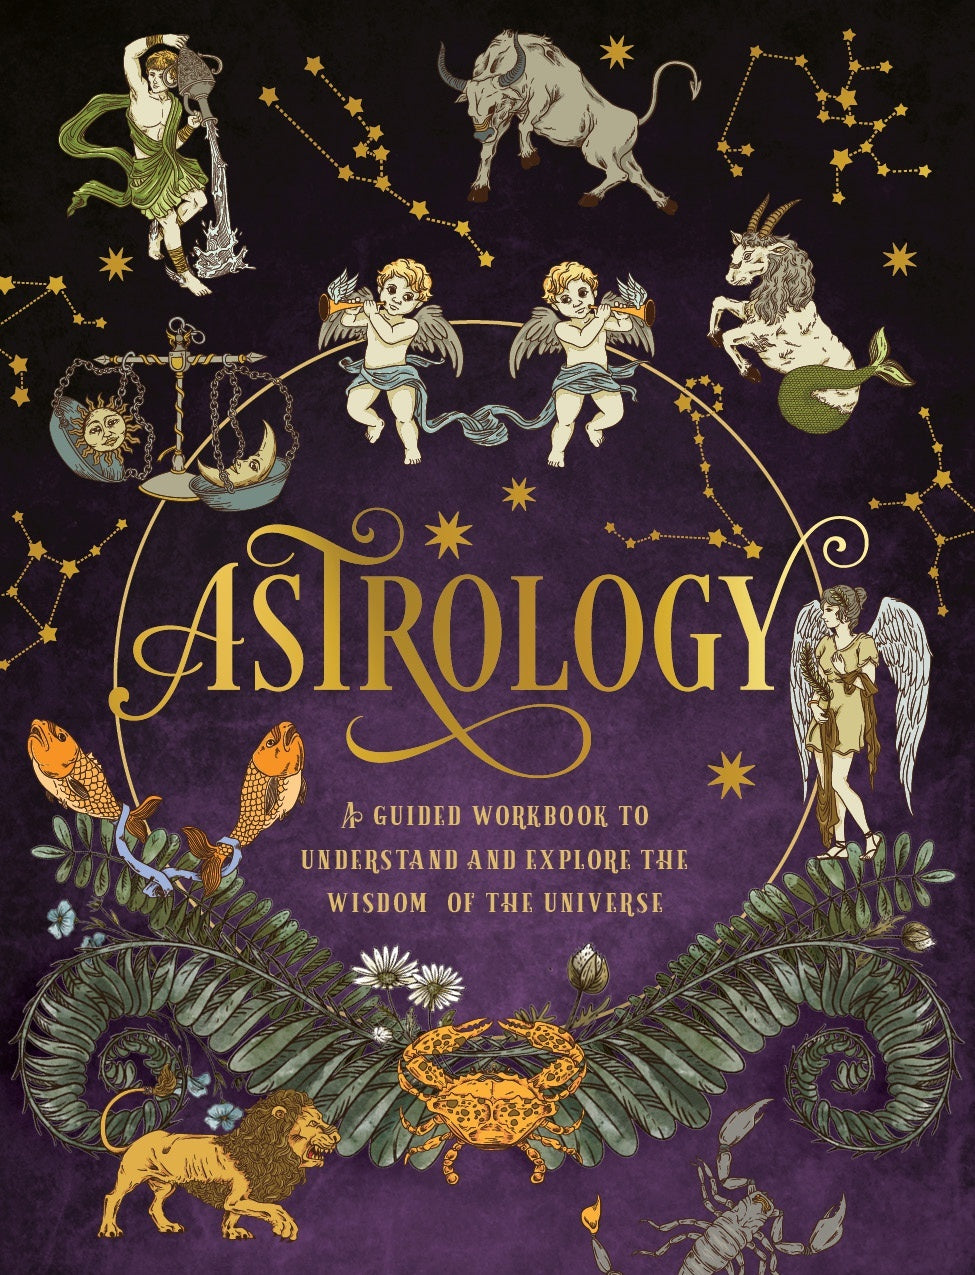 Astrology: A Guided Workbook: Understand and Explore the Wisdom of the Universe: Volume 2